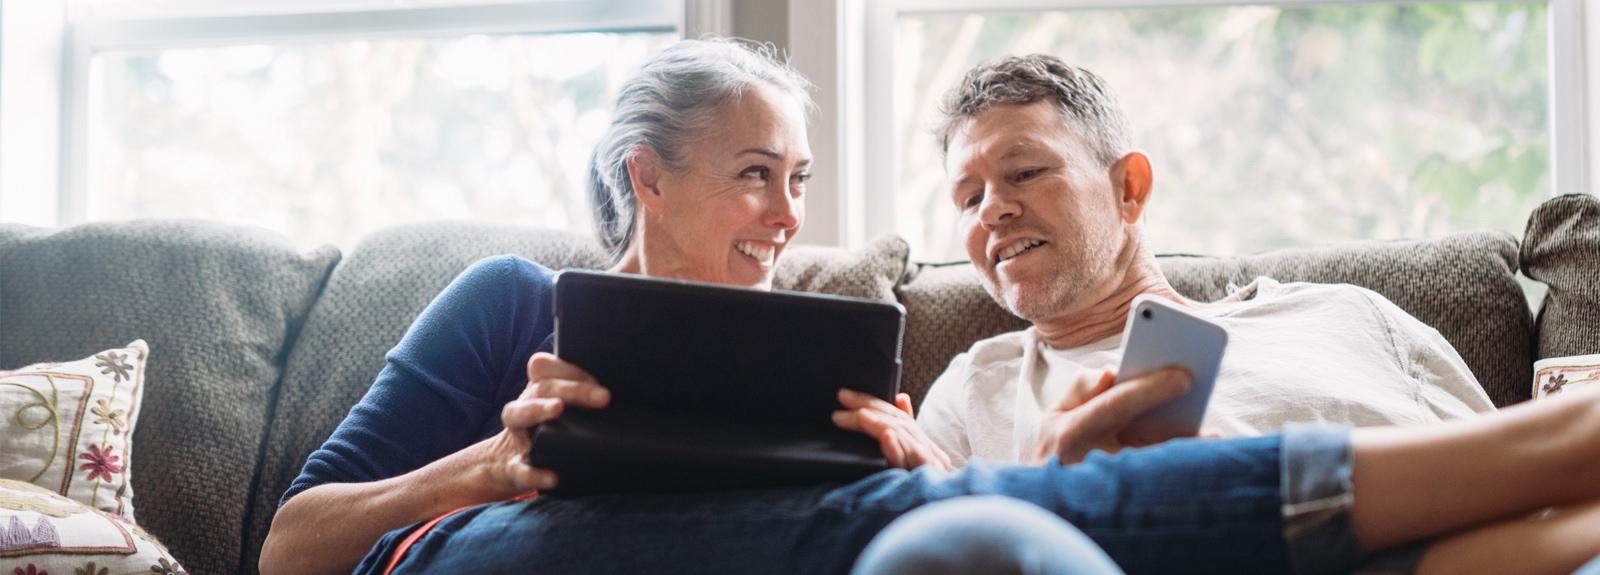 Man and a woman looking at a tablet